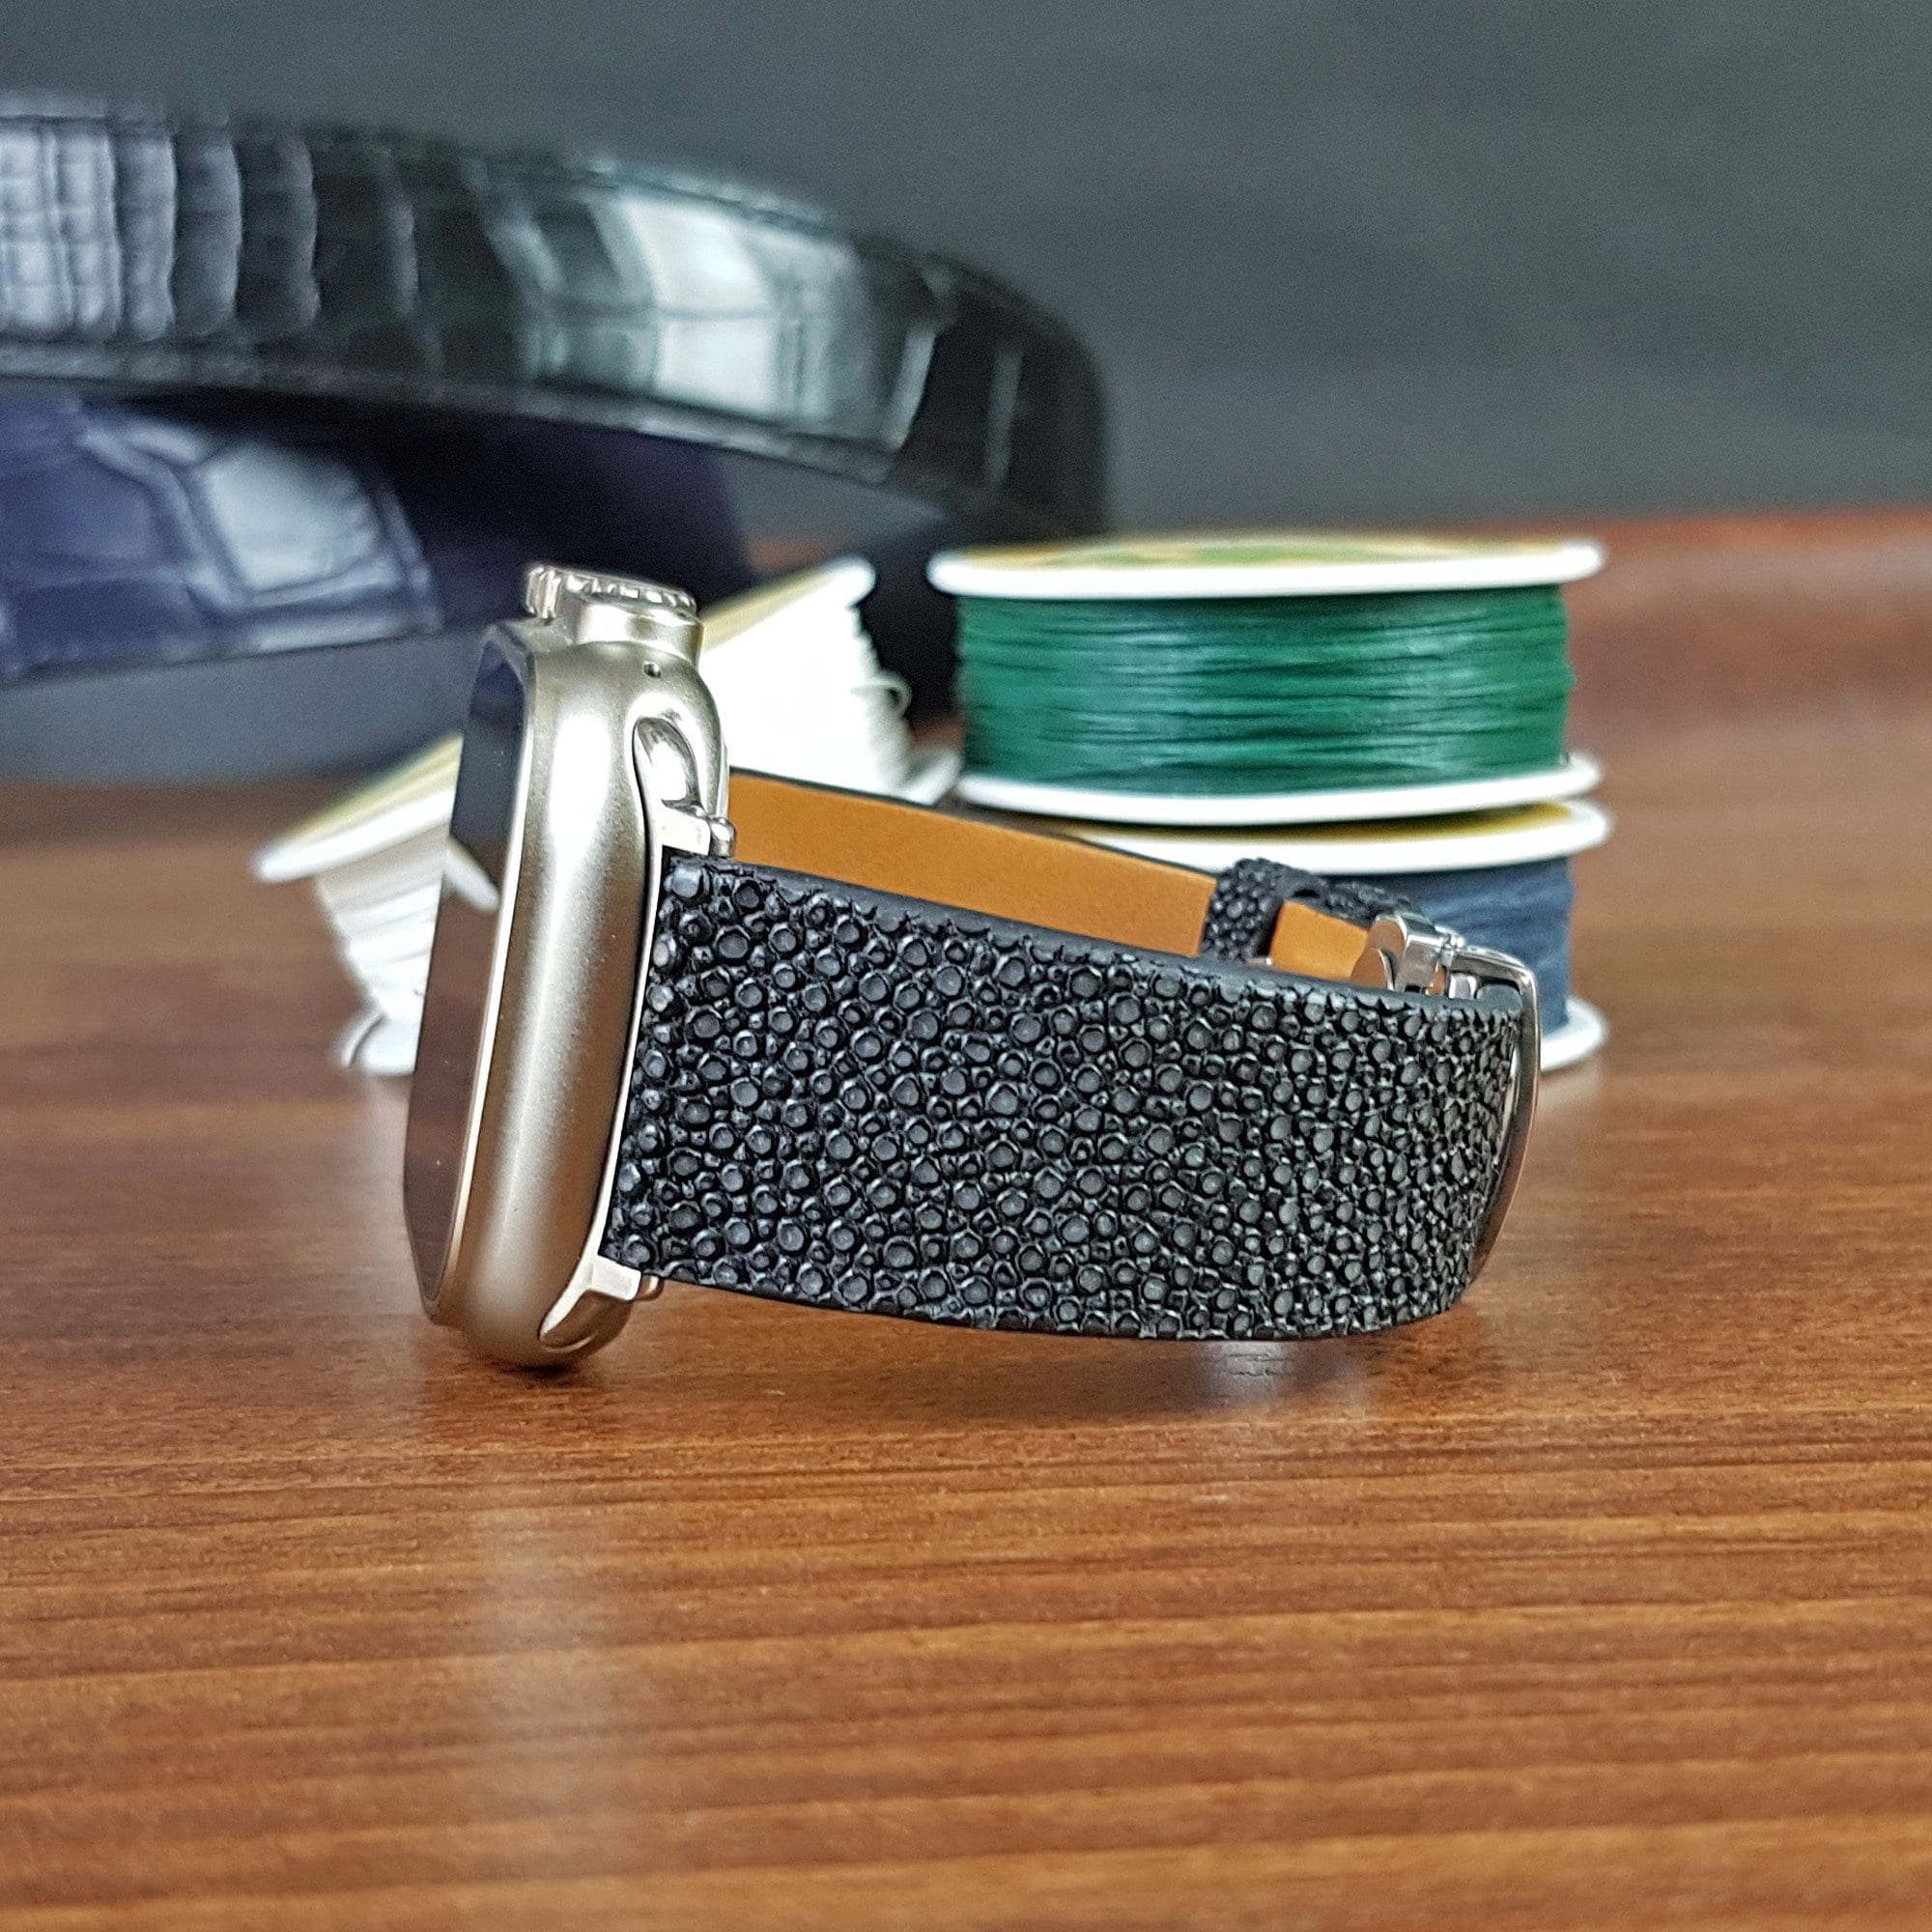 Upcycled Louis Vuitton Apple Watch Band 